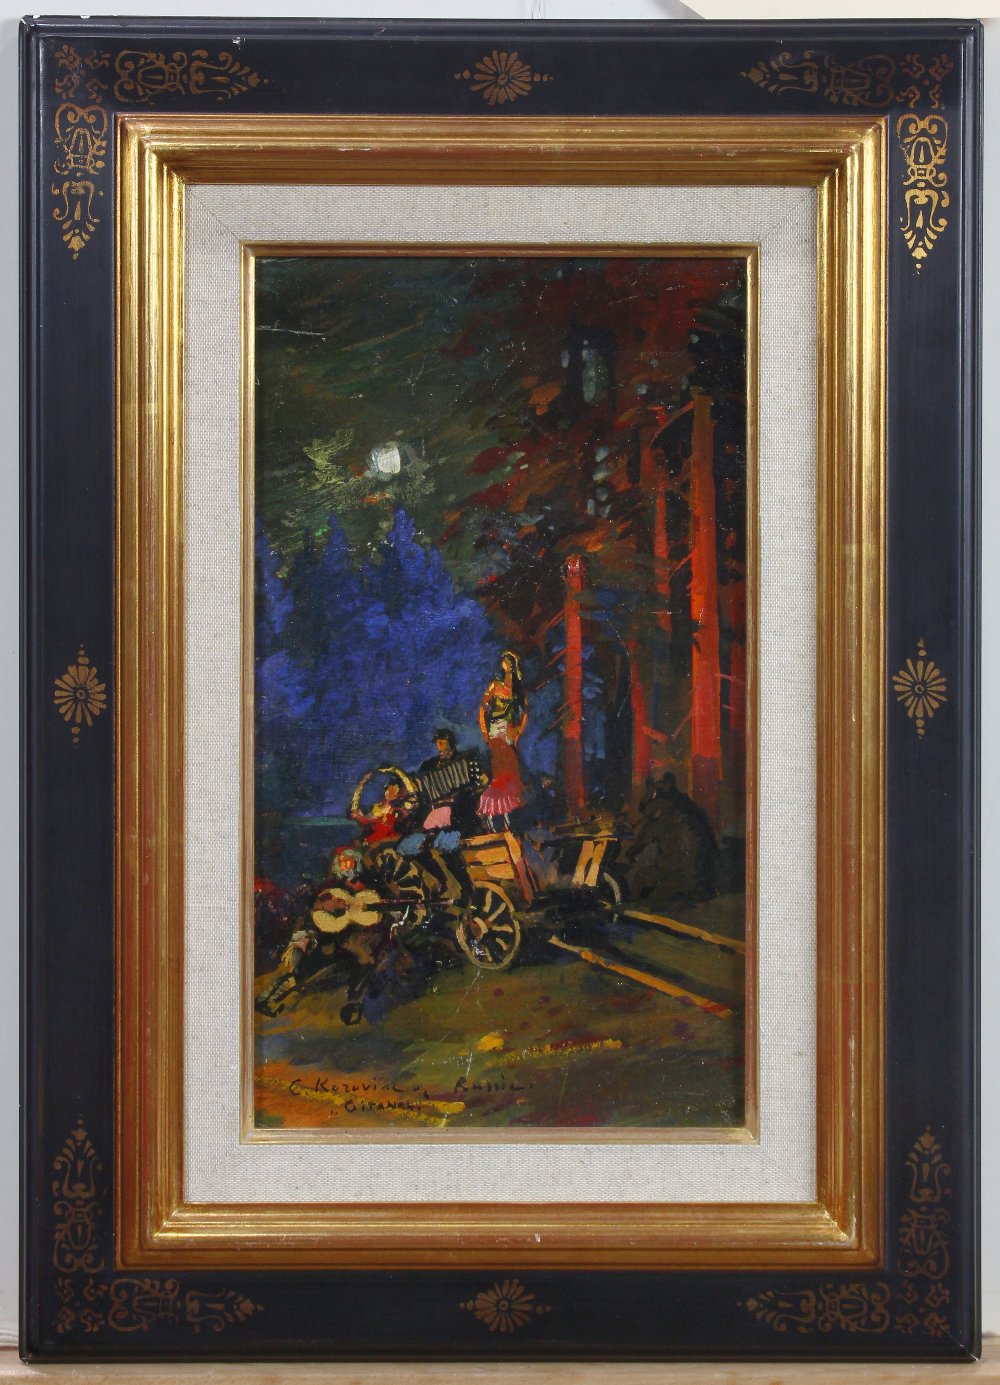 Konstantin Alexseyevitch Korovin (Russian, 1861-1939), "Gypsies," oil on board, signed and titled - Image 2 of 4